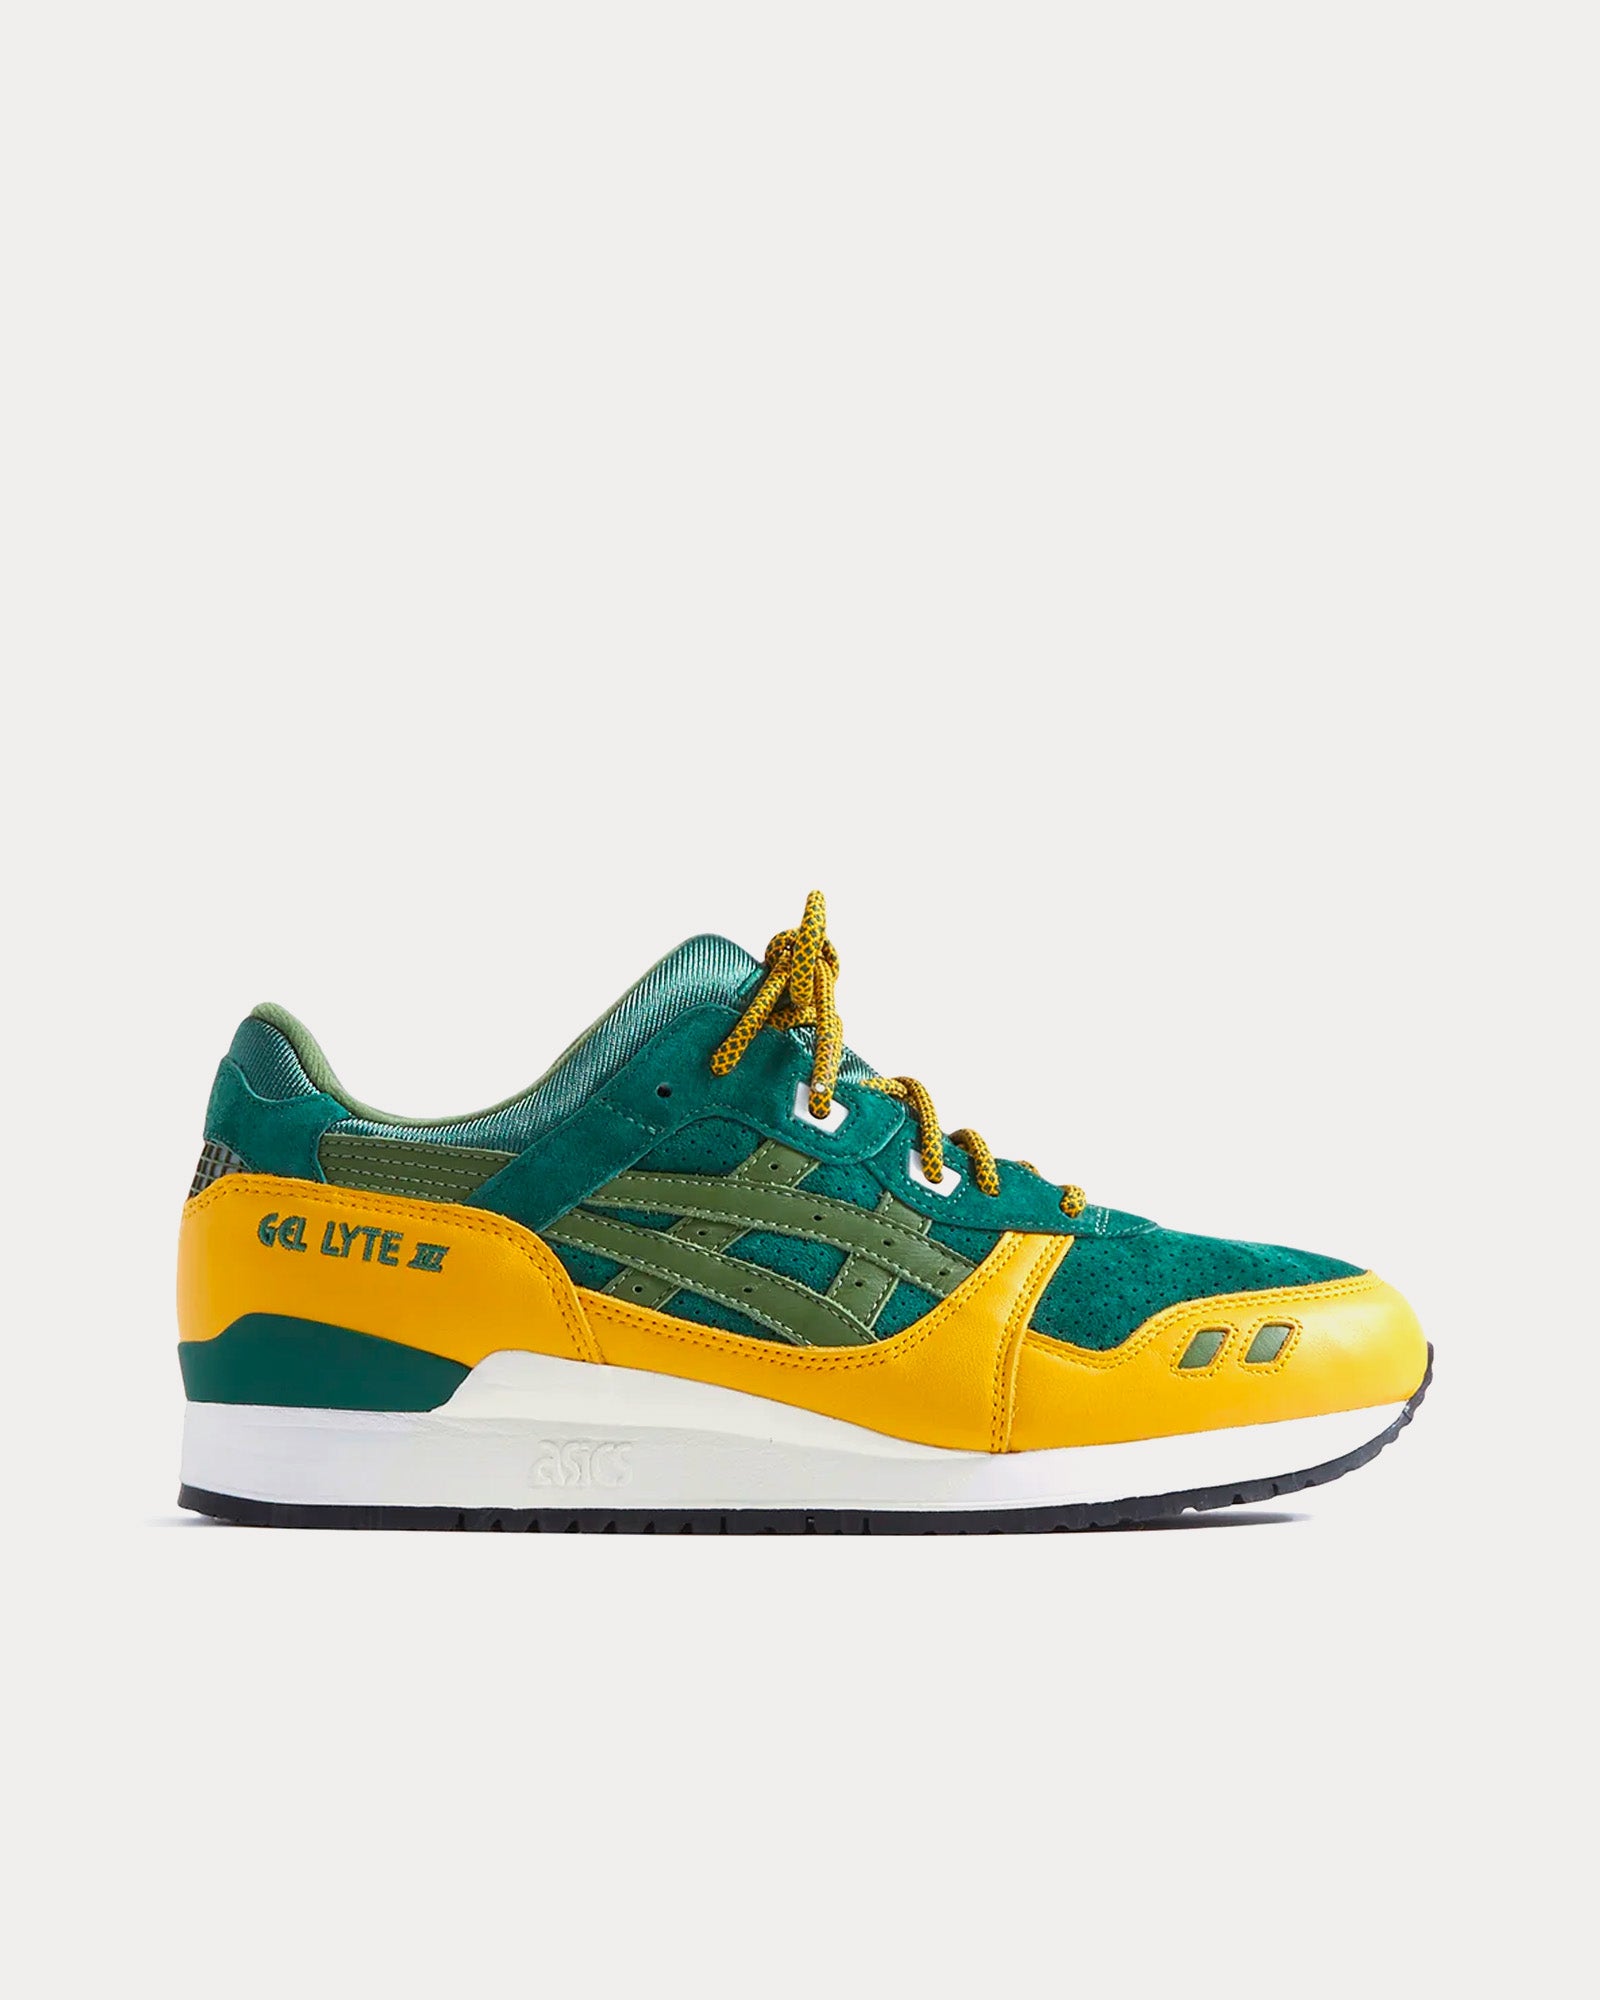 Asics x Kith - Marvel Gel-Lyte III Remastered 'Rogue' Green / Yellow Low Top Sneakers